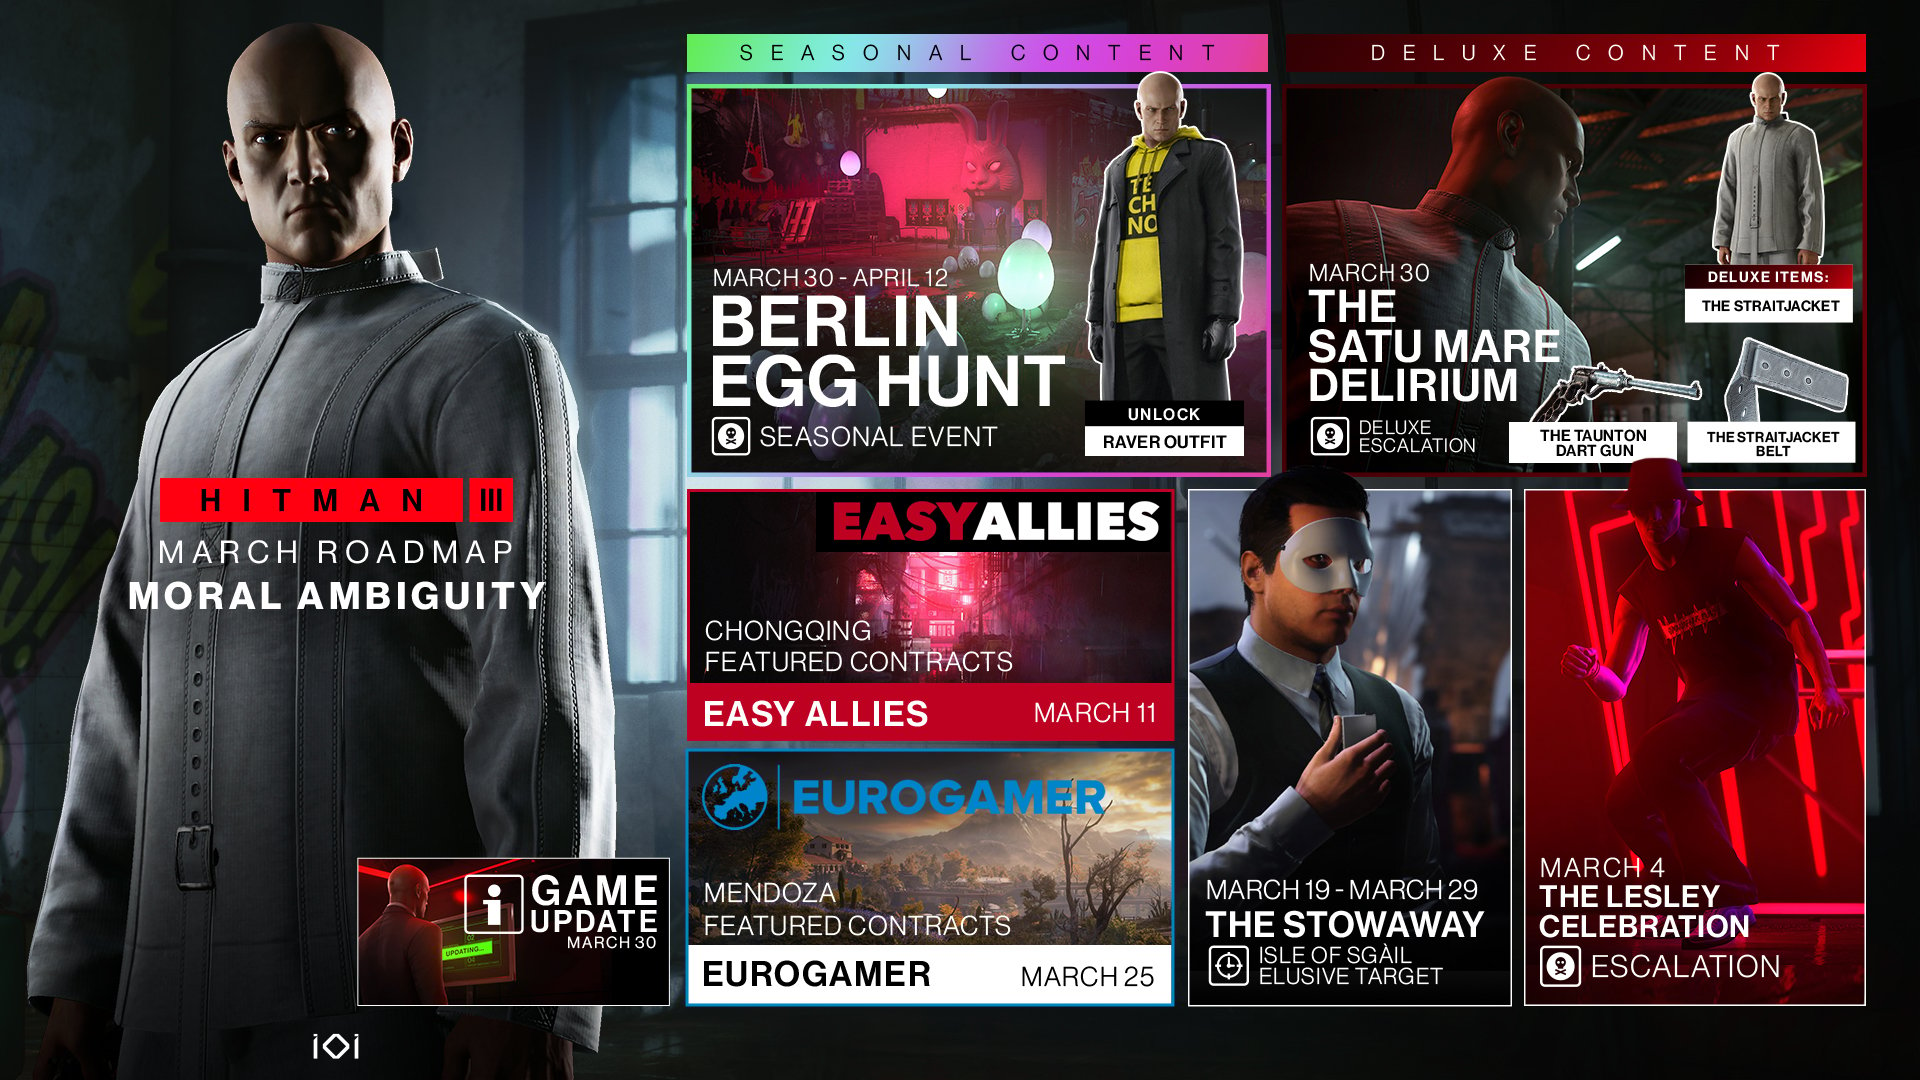 Hitman 3’s March content roadmap includes the game’s first seasonal